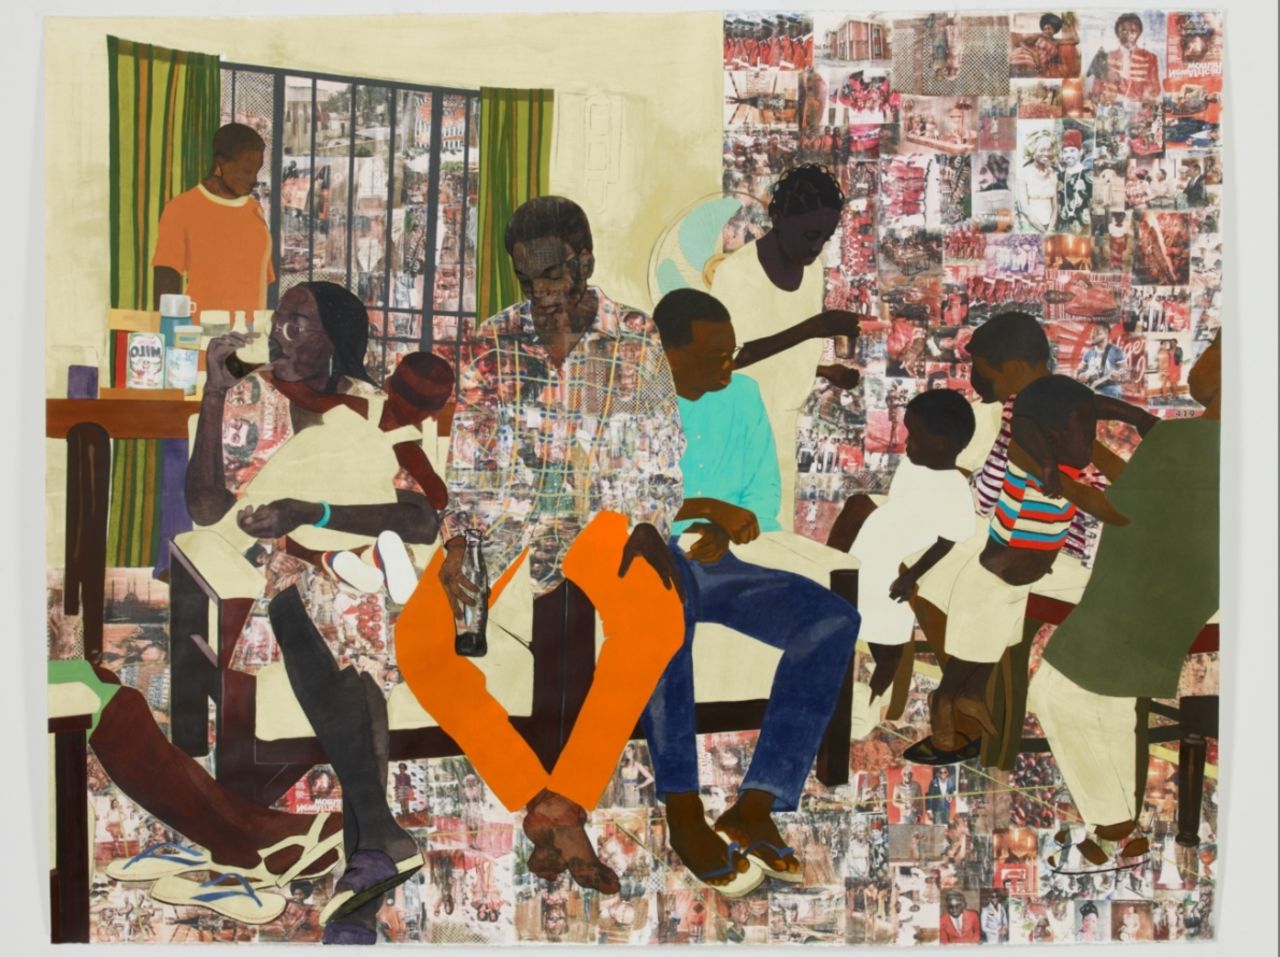 "This was a scene of a birthday party at my neighbours' house," said Akunyili. "I enjoyed putting this image together and thinking of the musicality of the arms, legs and heads as they moved across the page." 